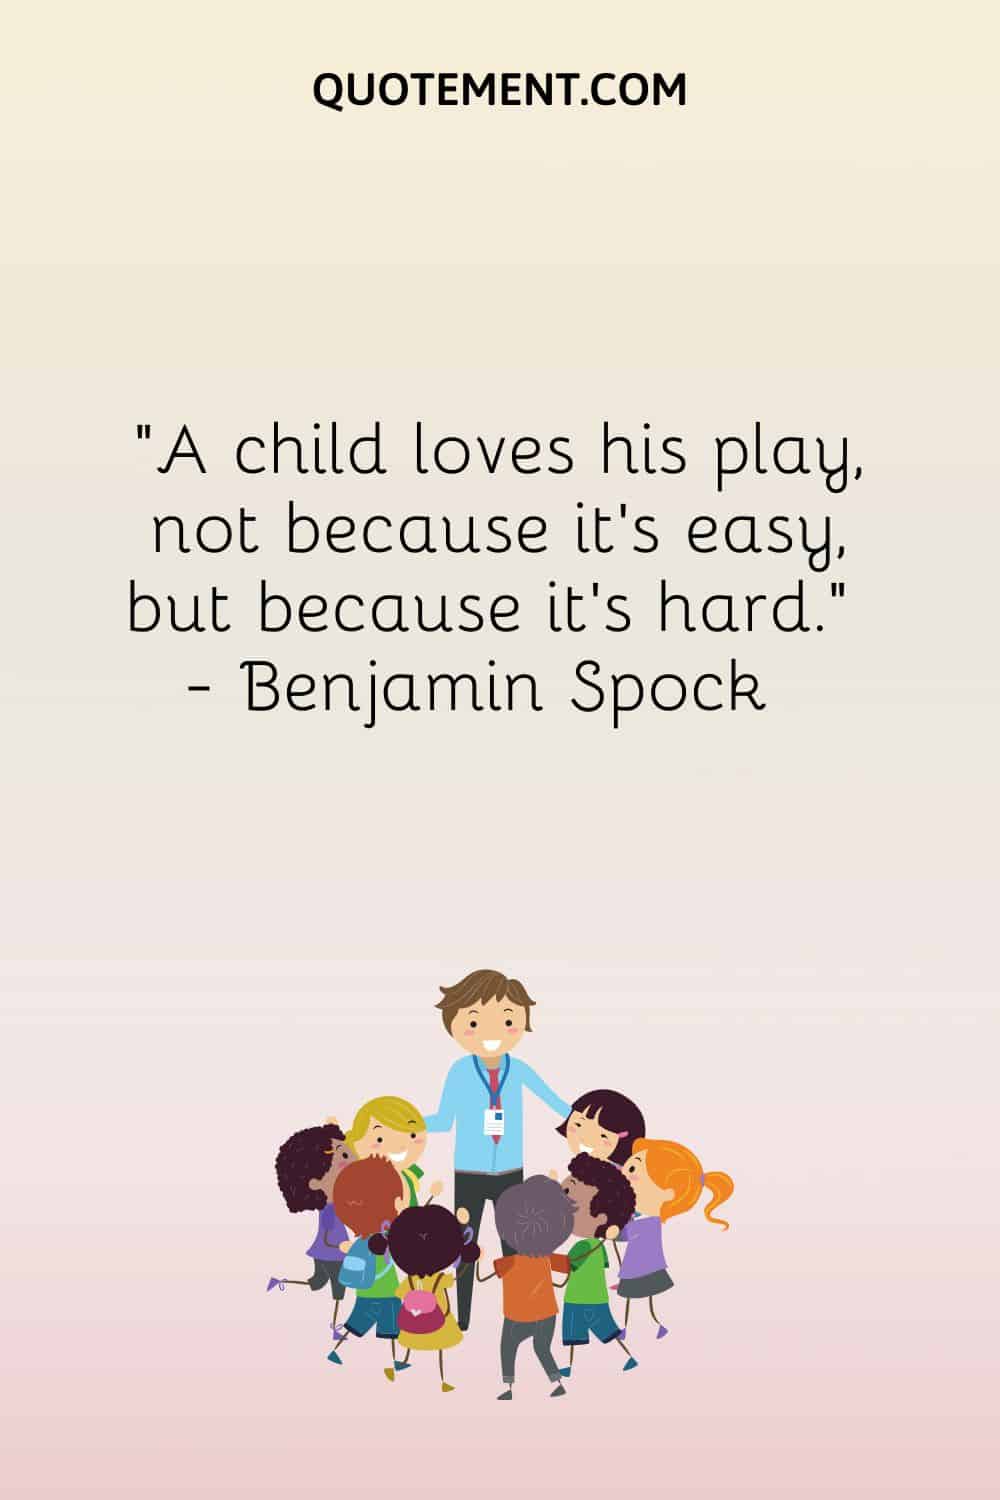 A child loves his play, not because it’s easy, but because it’s hard